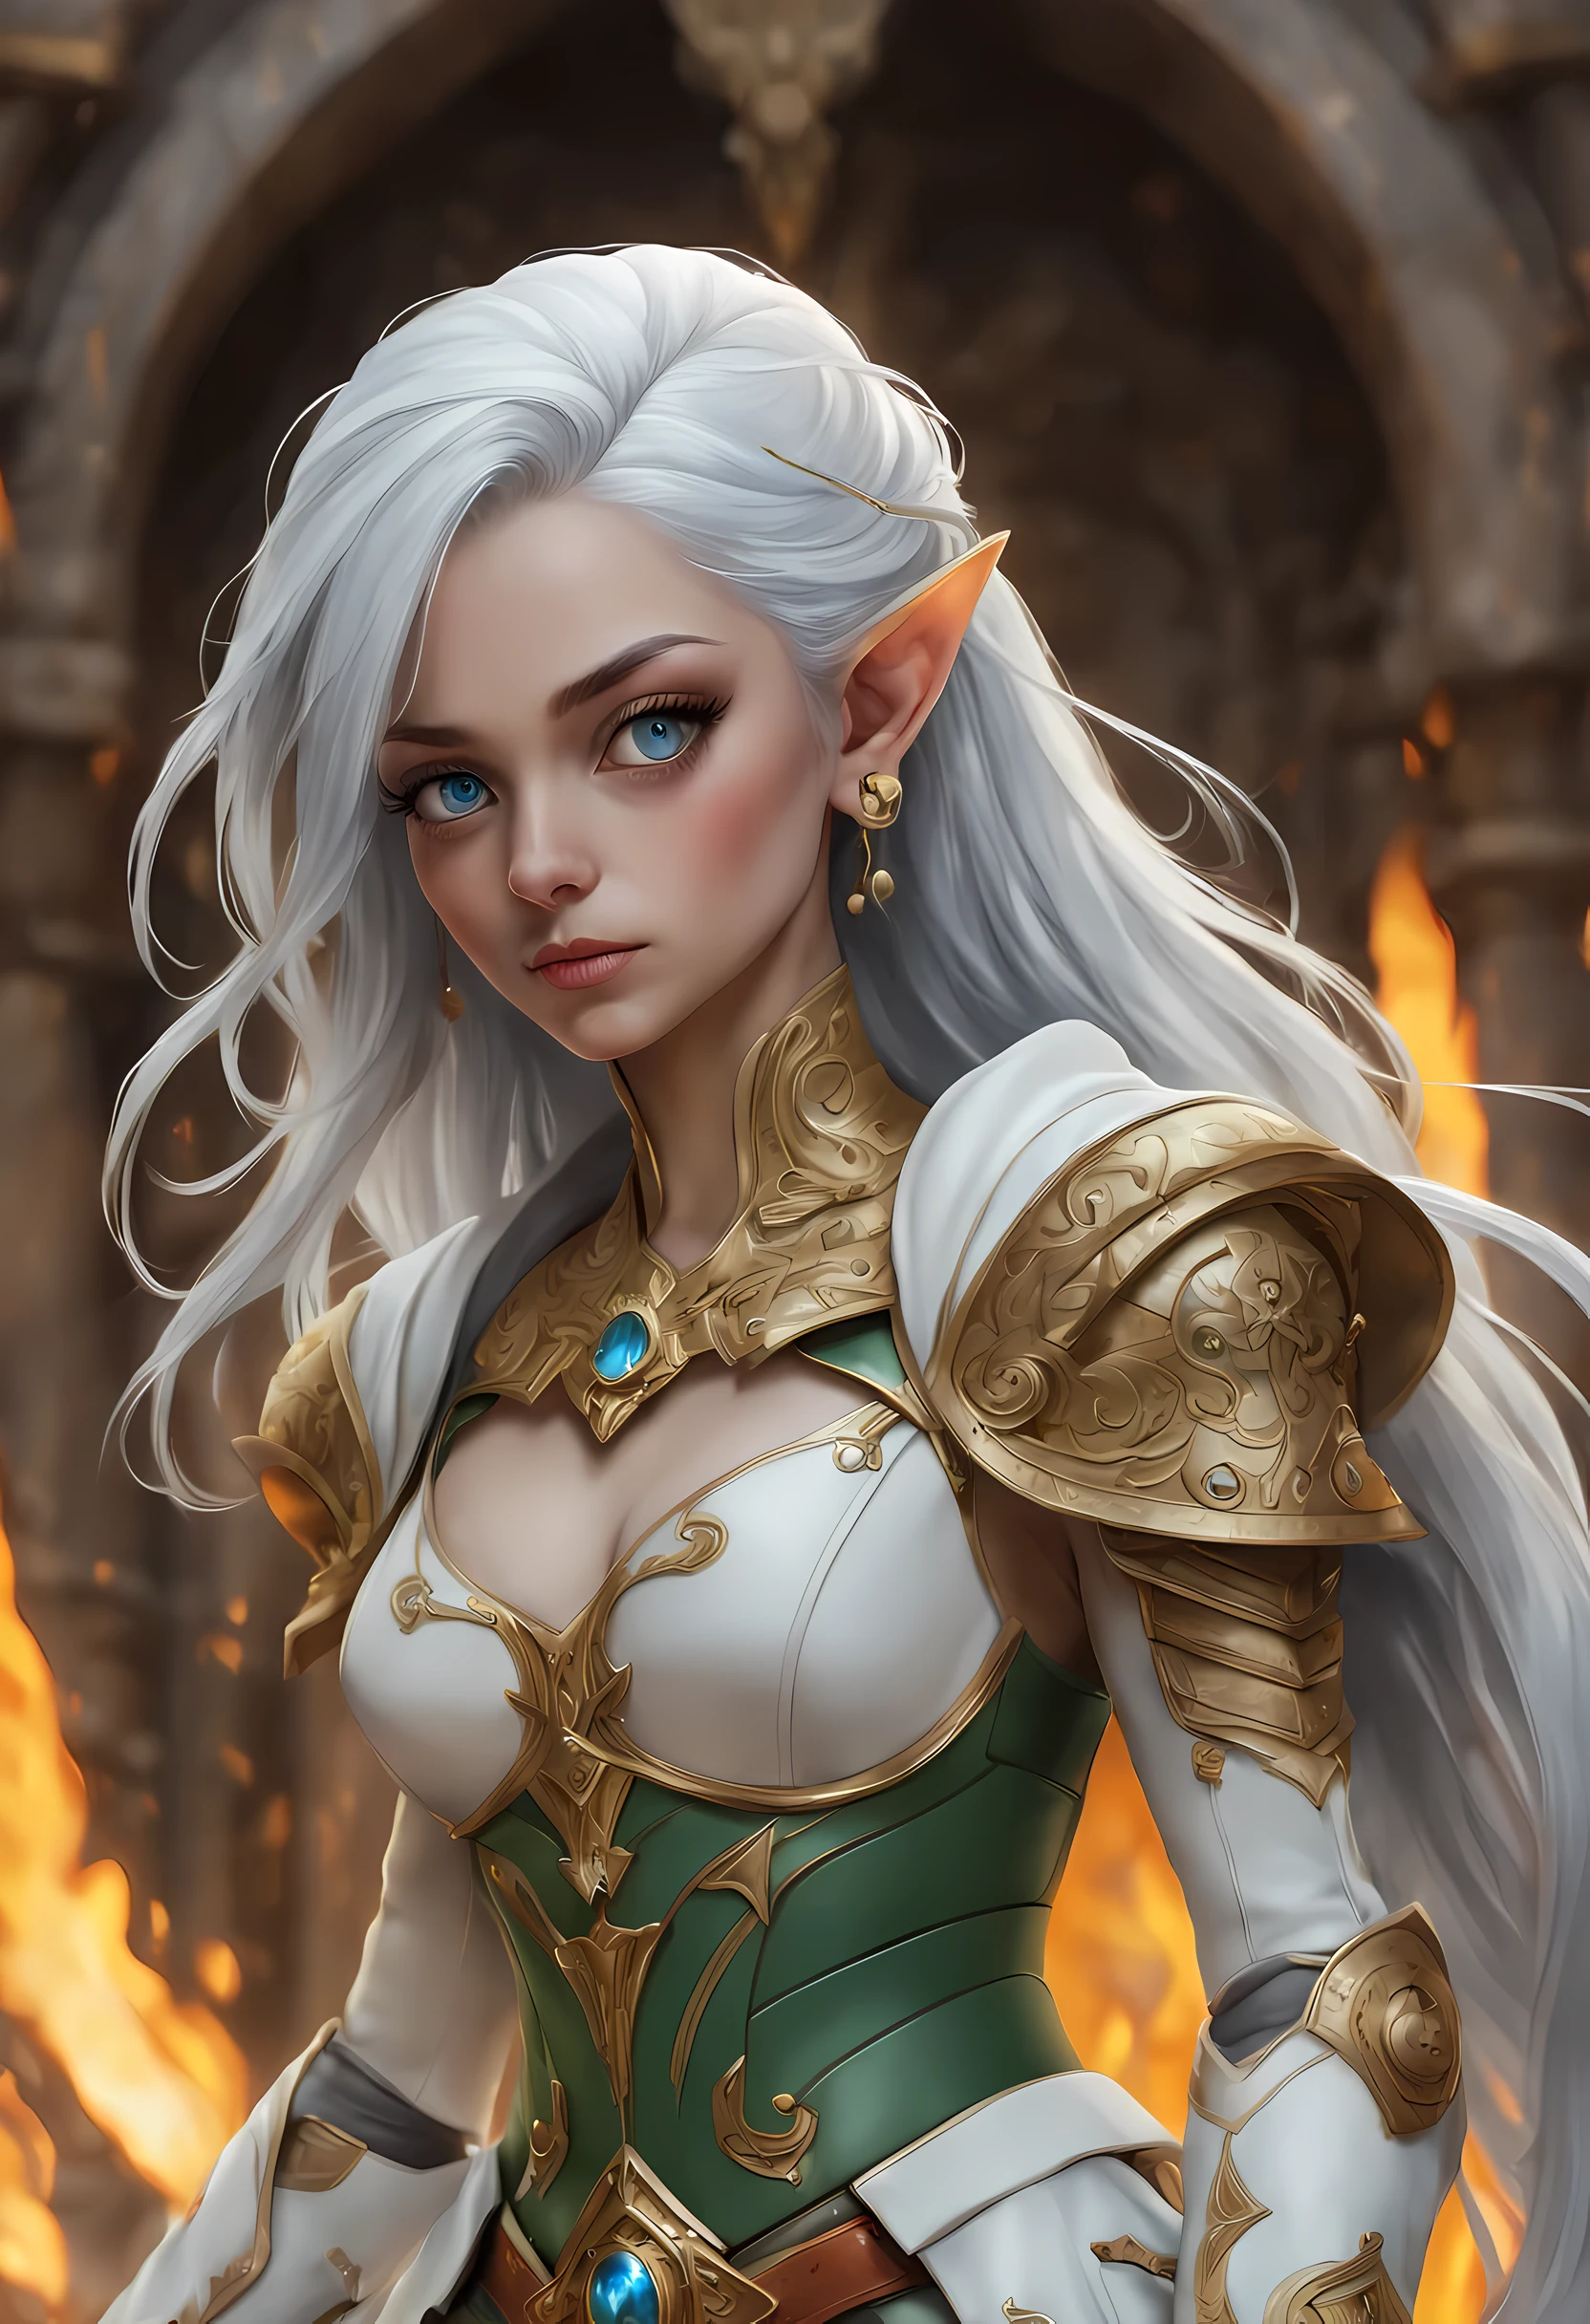 fantasy art, dnd art, RPG art, wide shot, (masterpiece: 1.4) a (portrait: 1.3) intense details, highly detailed, photorealistic, best quality, highres, portrait a female (fantasy art, Masterpiece, best quality: 1.3) [[blue skin: 1.5]], intense details facial details, exquisite beauty, (fantasy art, Masterpiece, best quality) cleric, (blue: 1.3) skinned female, (white hair: 1.3), long hair, intense (green: 1.3) eye, fantasy art, Masterpiece, best quality) armed a fiery sword red fire, wearing heavy (white: 1.3) half plate mail armor, wearing high heeled laced boots, wearing an(orange :1.3) cloak, wearing glowing holy symbol GlowingRunes_yellow, within fantasy temple background, reflection light, high details, best quality, 16k, [ultra detailed], masterpiece, best quality, (extremely detailed), close up, ultra wide shot, photorealistic, RAW, fantasy art, dnd art, fantasy art, realistic art,((best quality)), ((masterpiece)), (detailed), perfect face, ((no ears: 1.6))